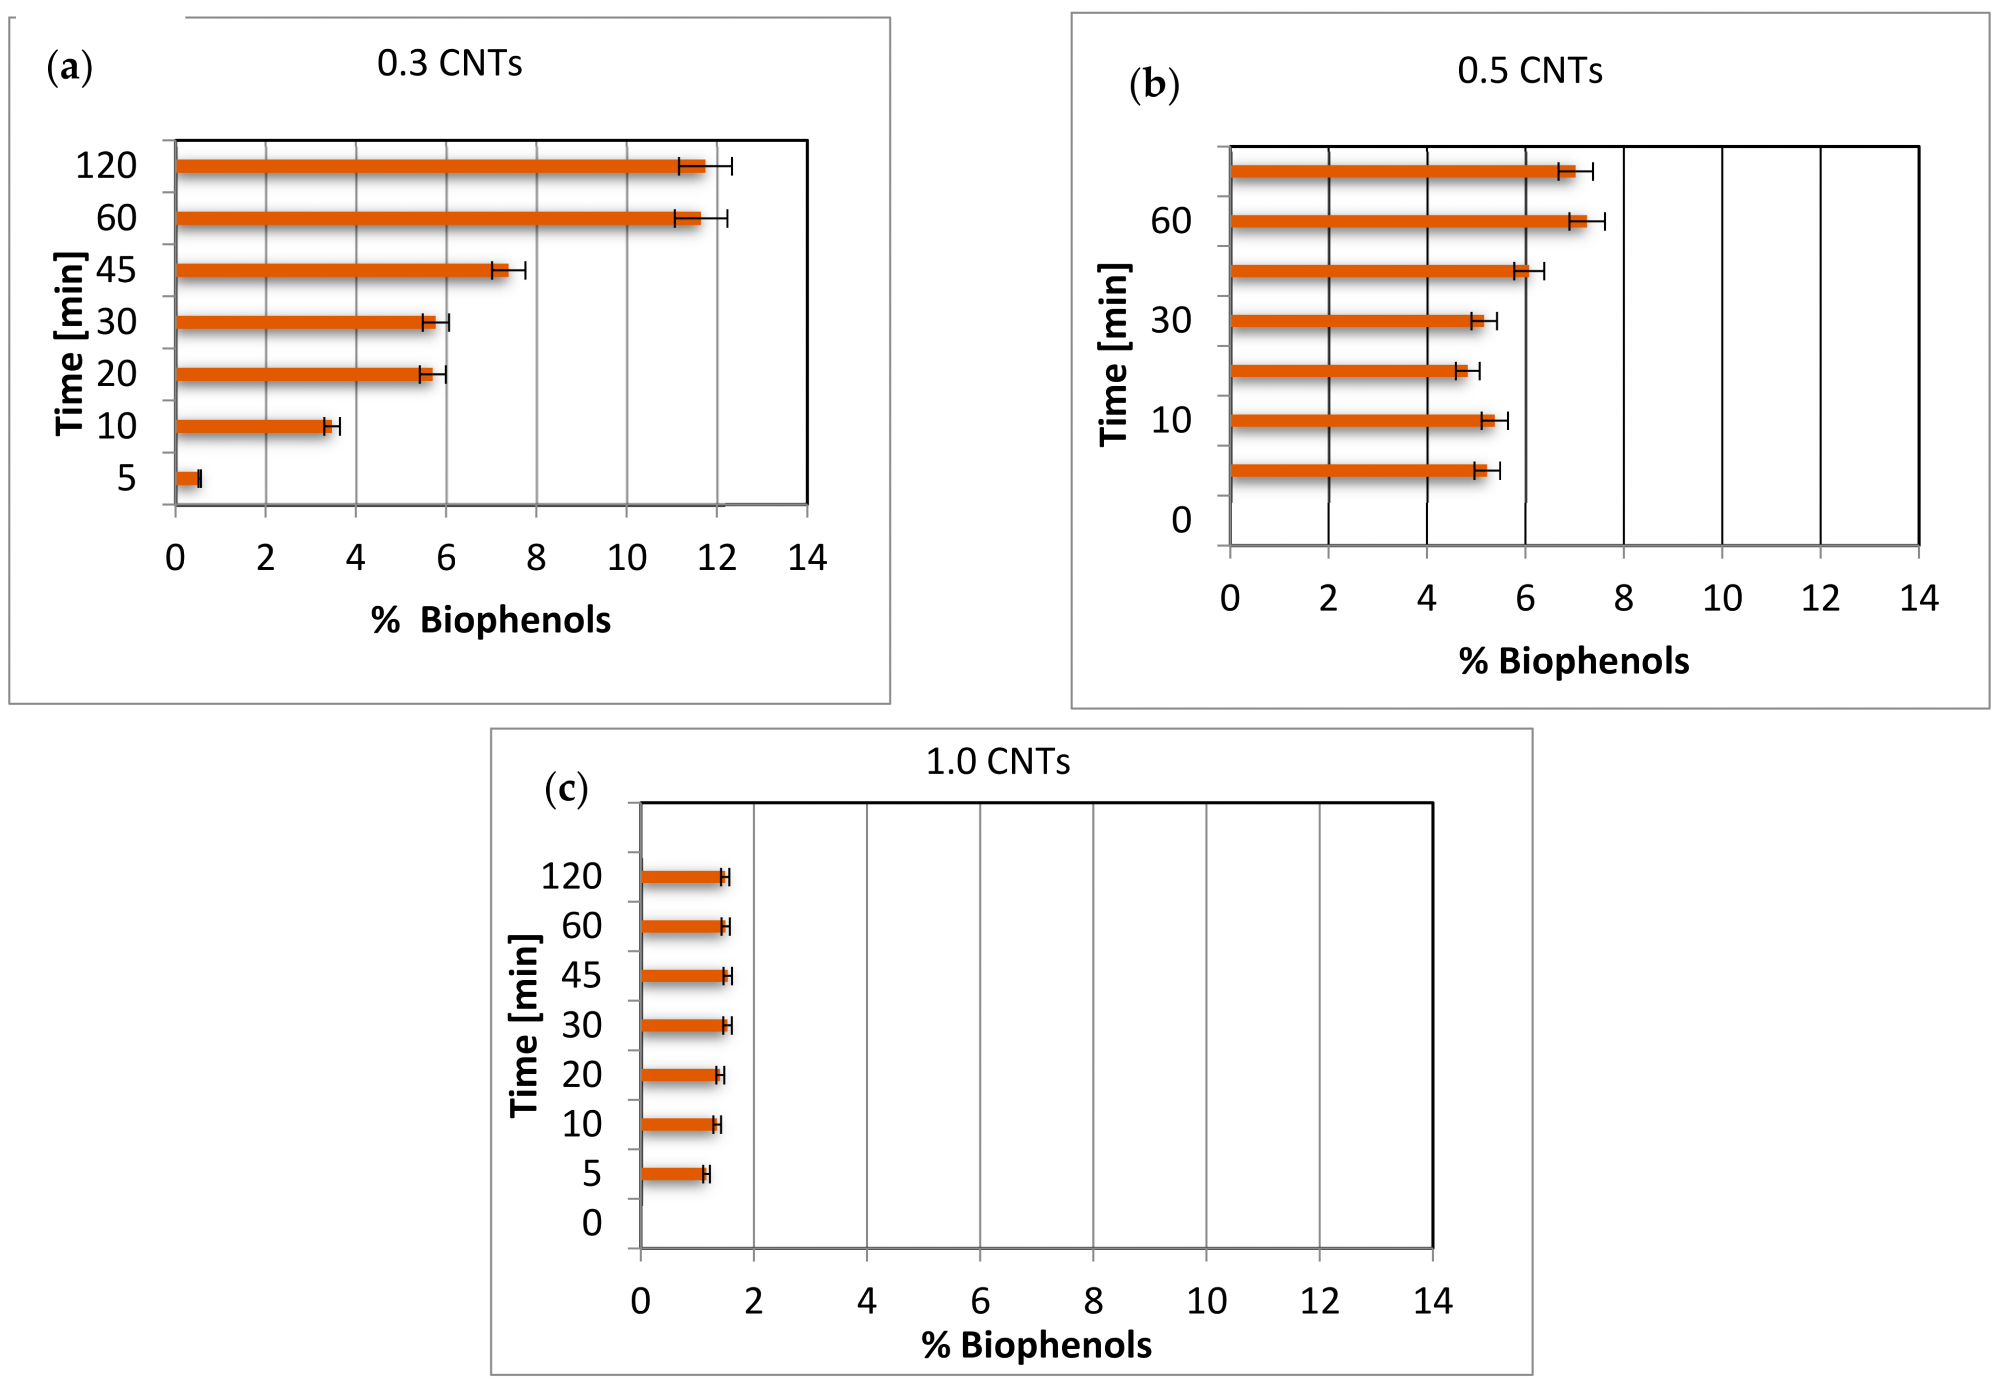 Percentage of biophenols with respect to the total adsorbed mass for systems with (a) 0.3, (b) 0.5, (c) 1.0 g of carbon nanotubes.